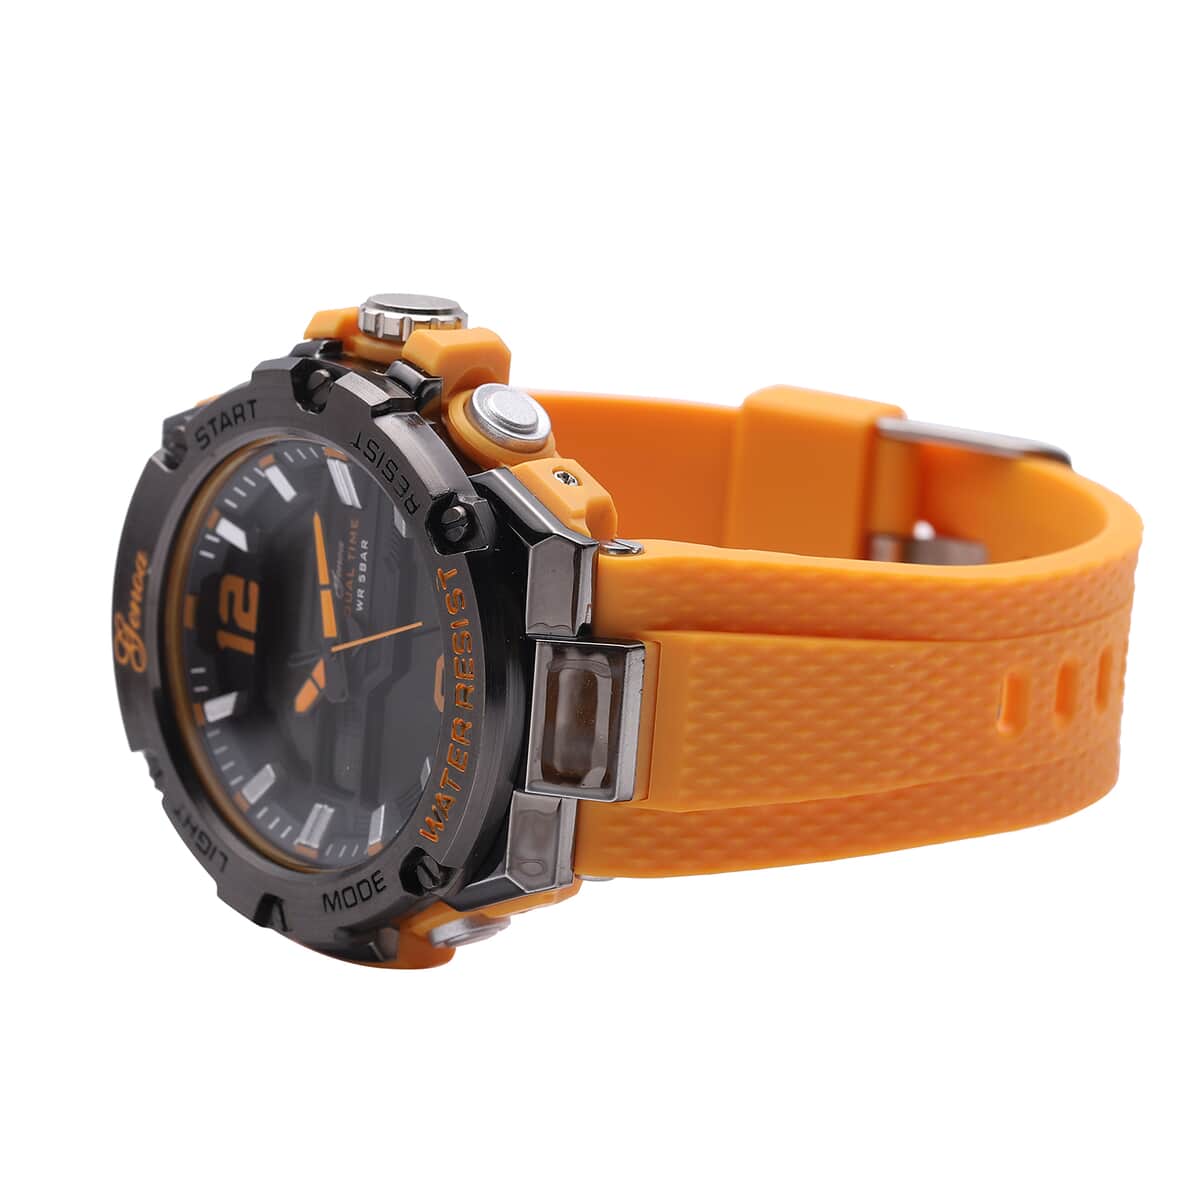 Genoa Japanese and Electronic Movement Multifunctional Key Watch in Orange Silicone Strap (48 mm) image number 3